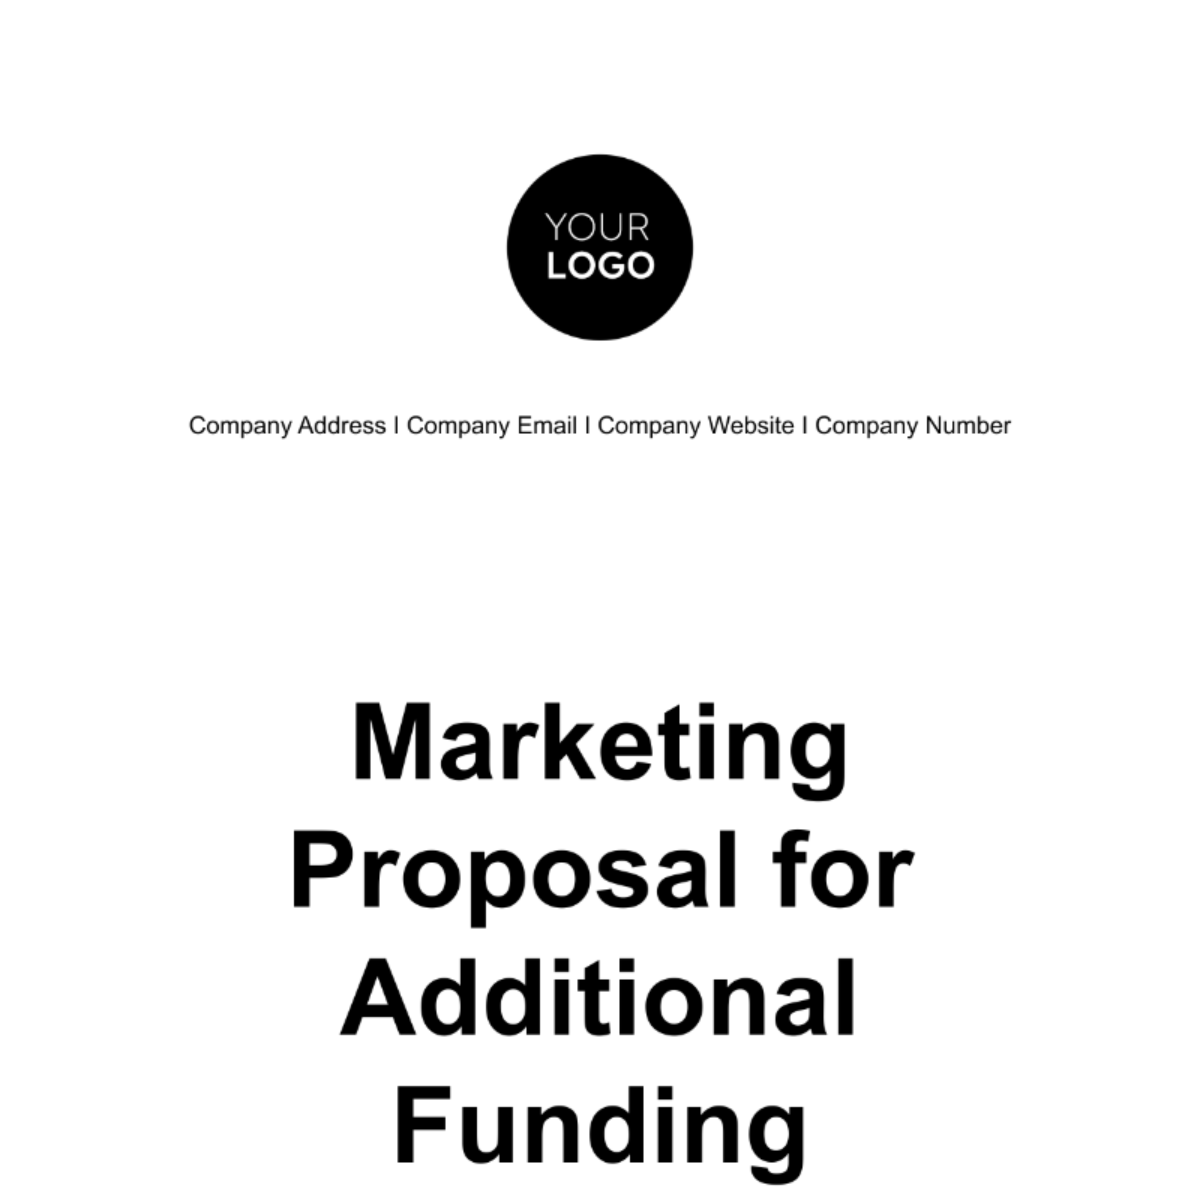 Free Marketing Proposal for Additional Funding Template